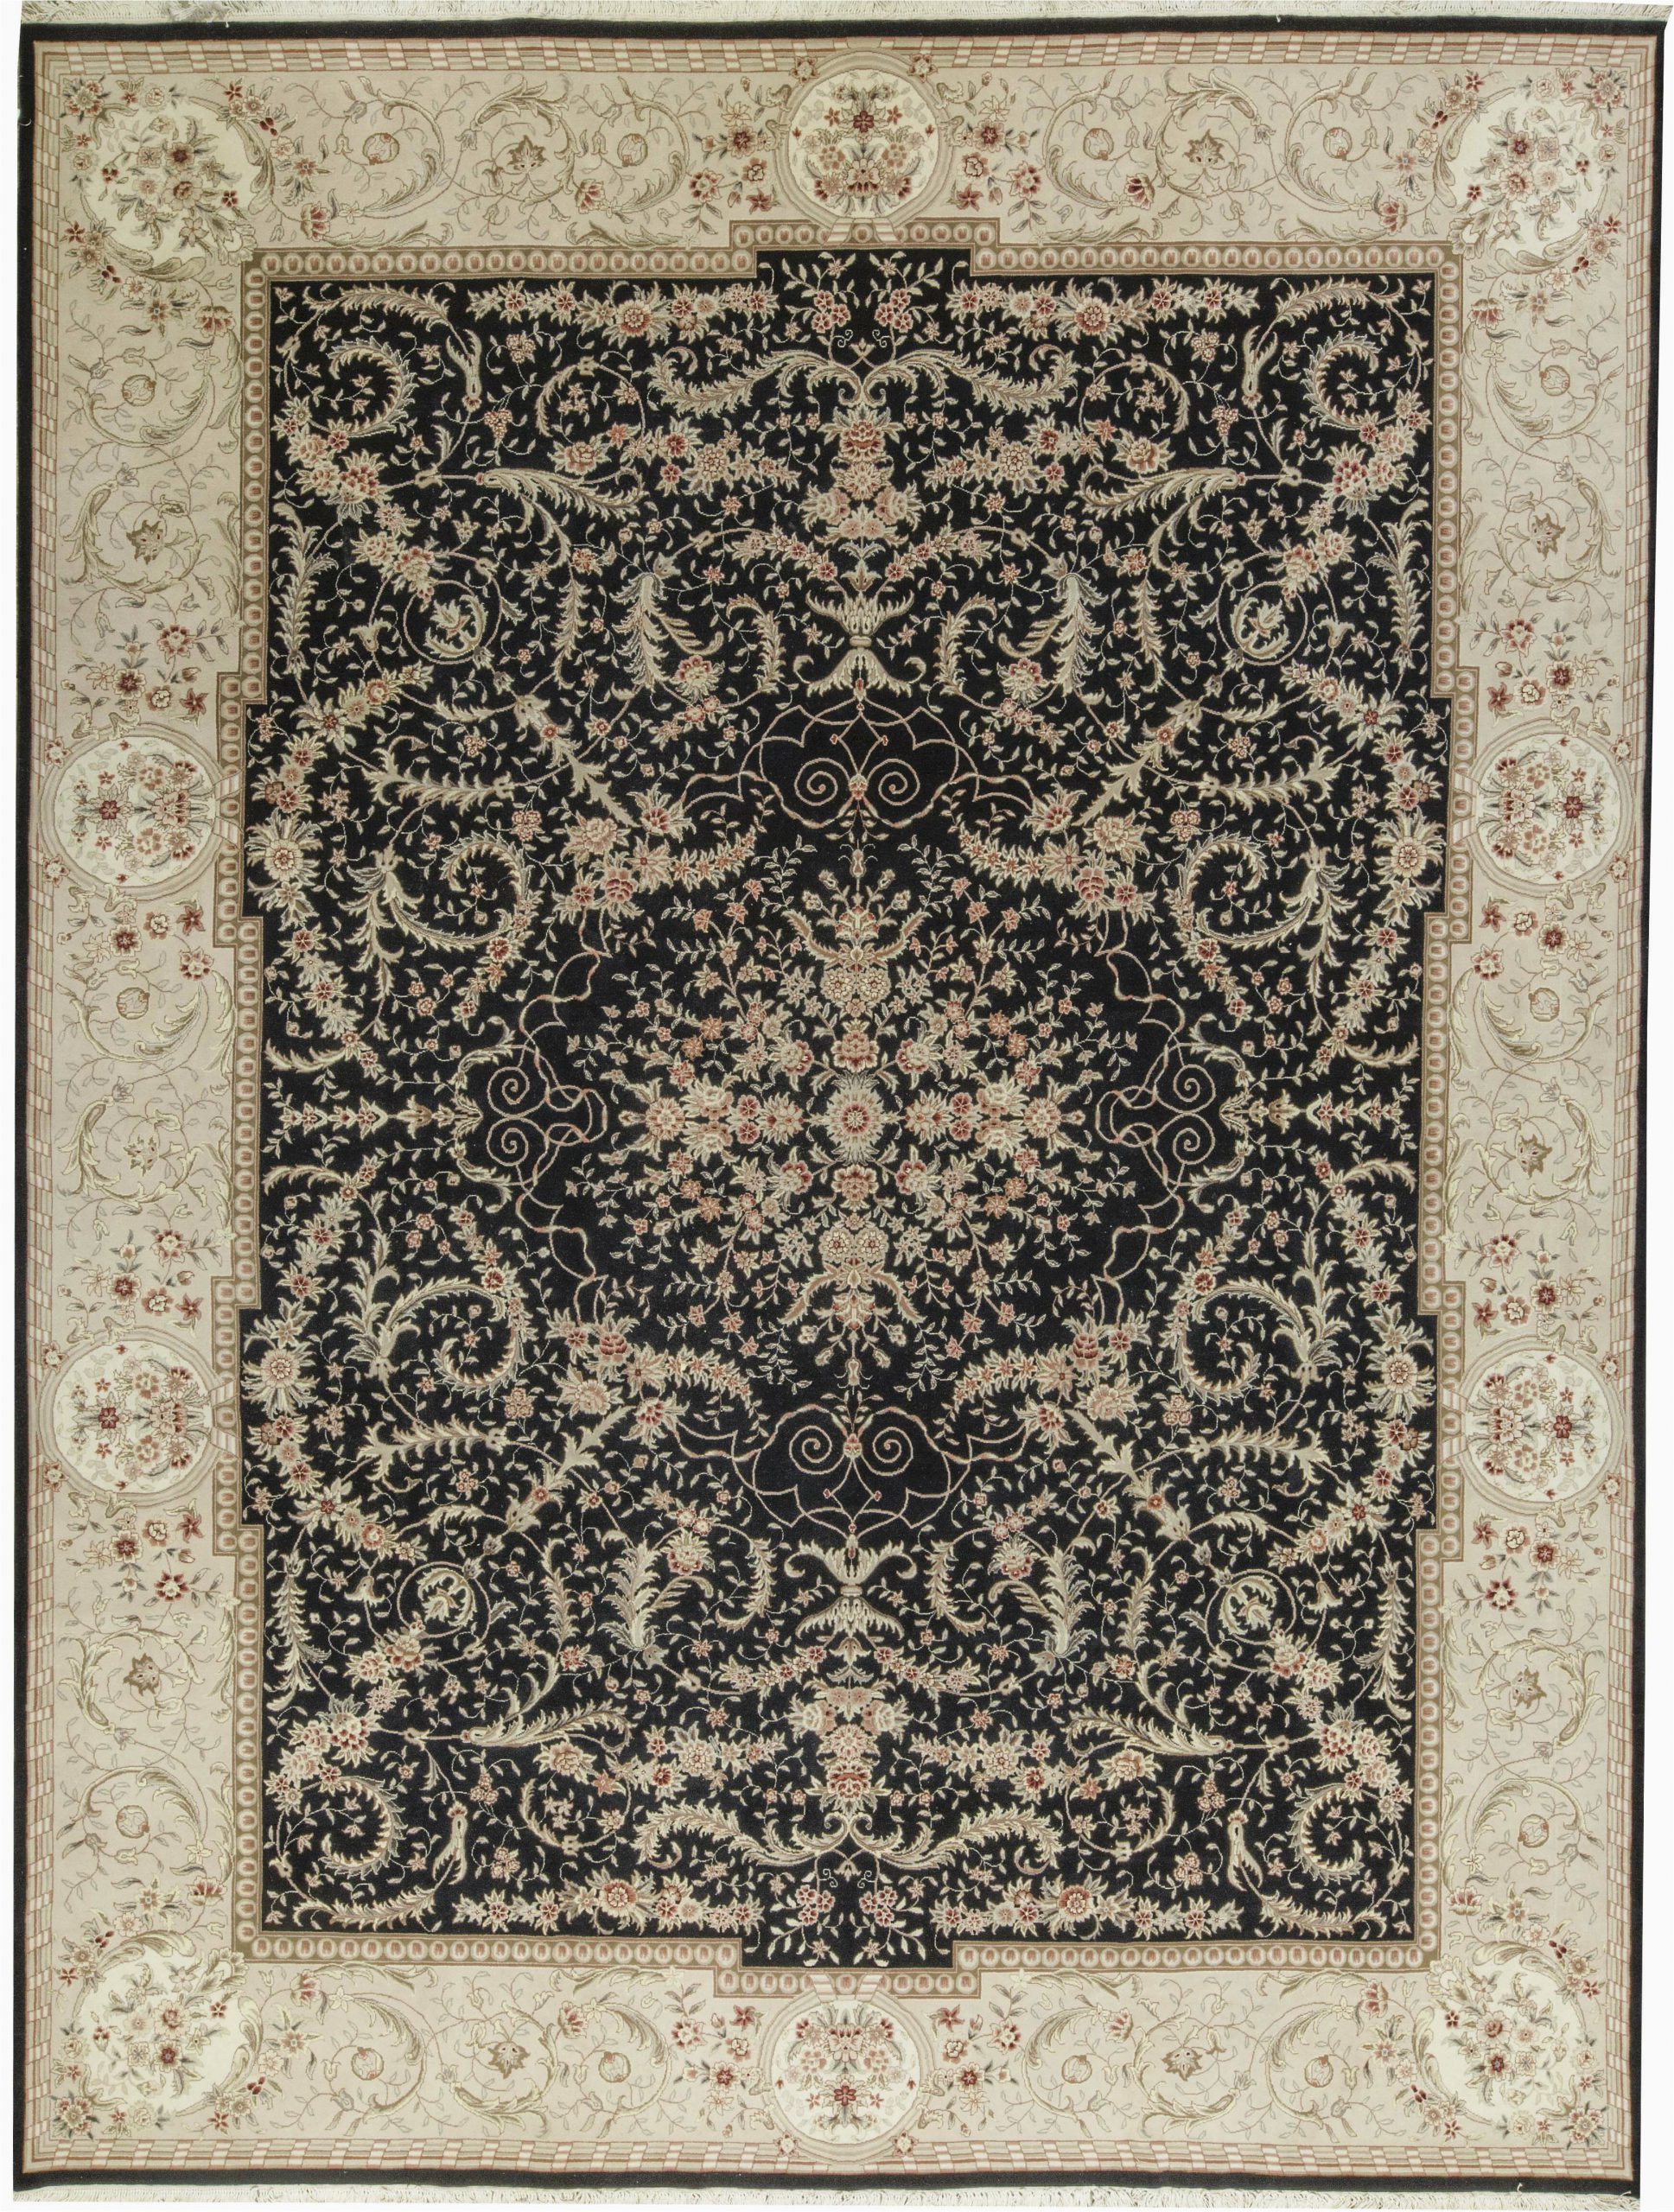 11 by 14 area Rugs E Of A Kind Elegance Select Handwoven 11 9" X 14 9" Wool Silk Black Gray area Rug